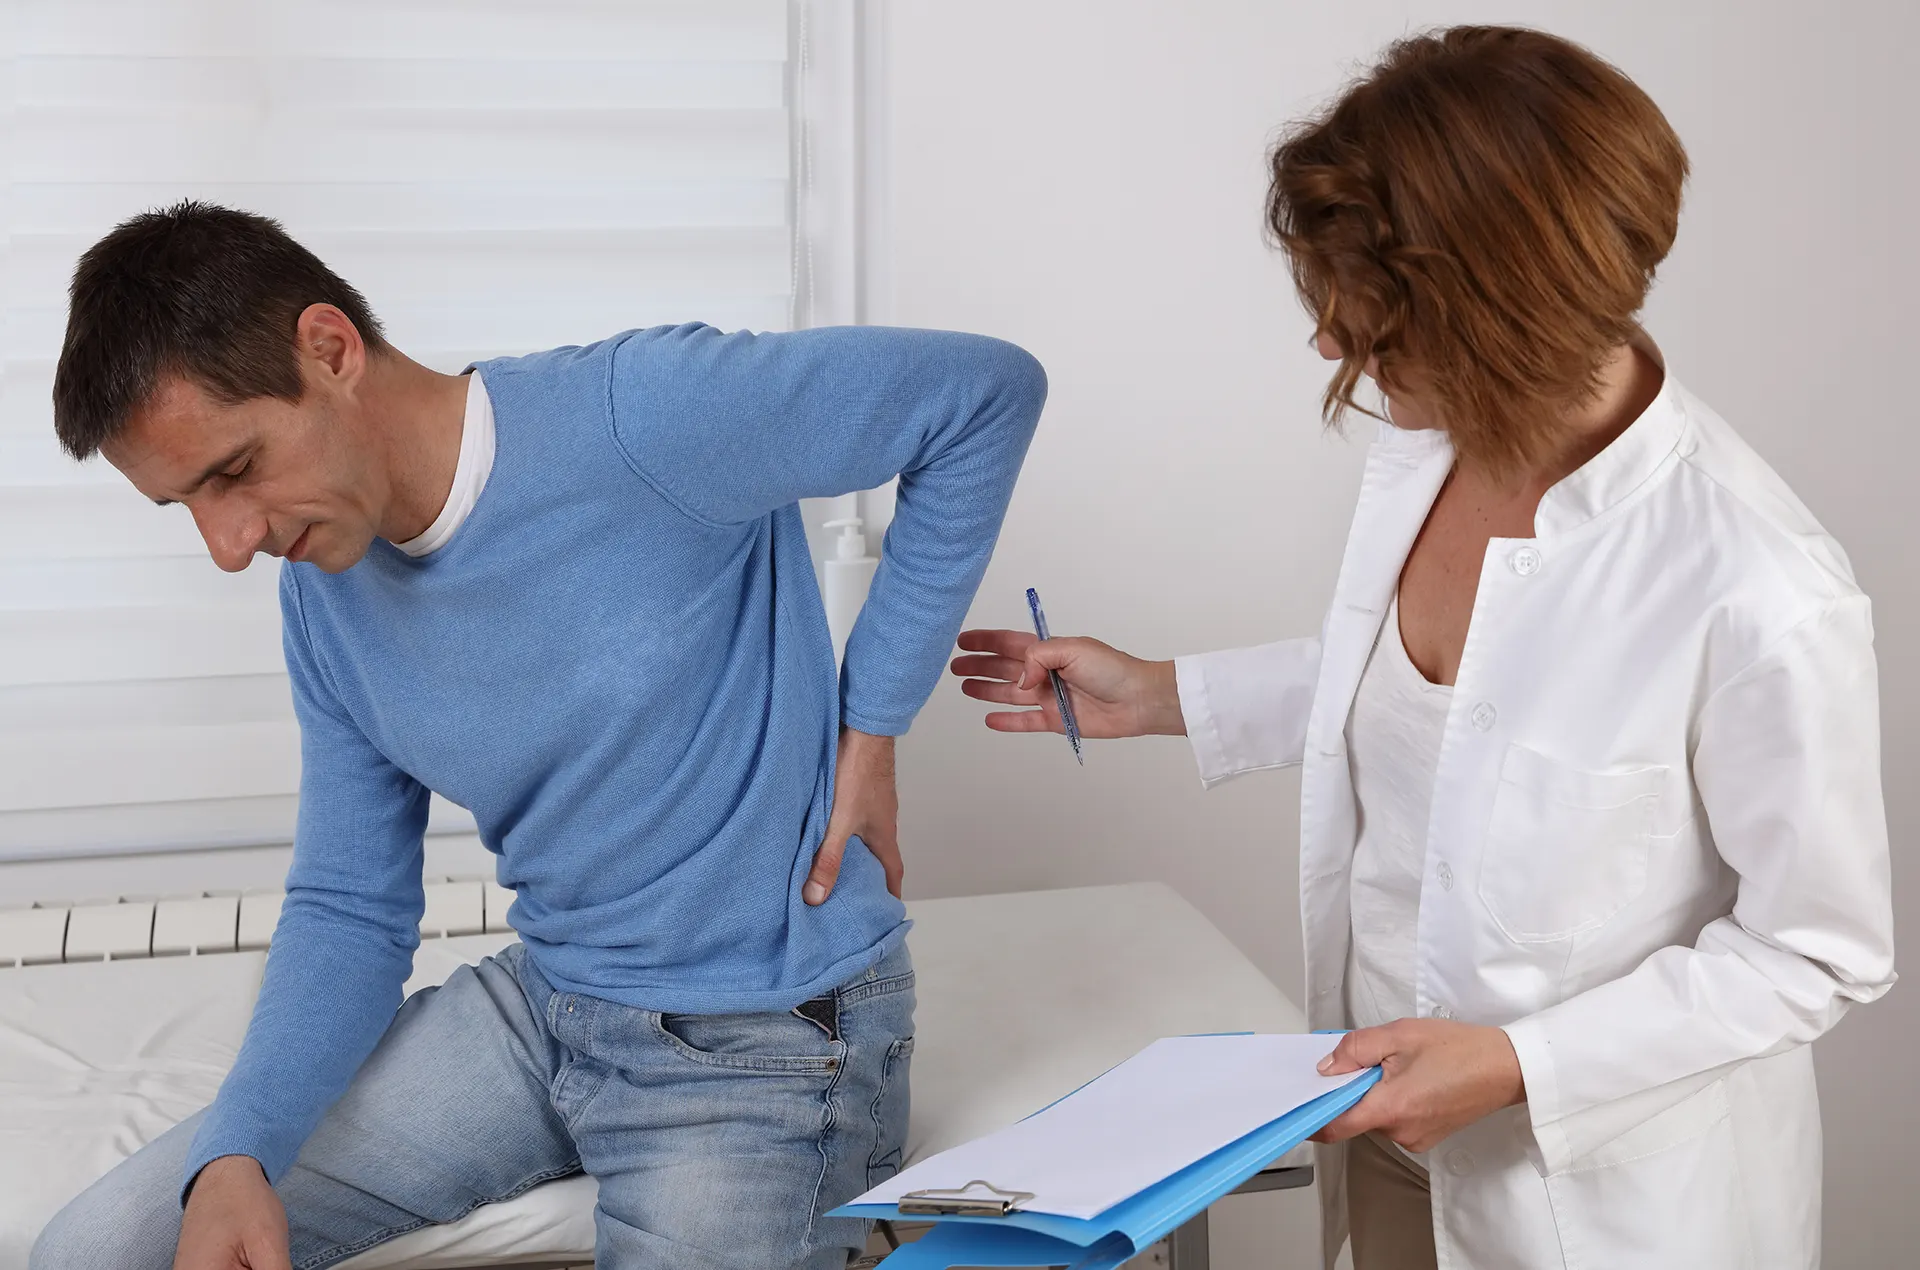 Review what your total settlement amount will be for a recent car accident herniated disk claim in Florida